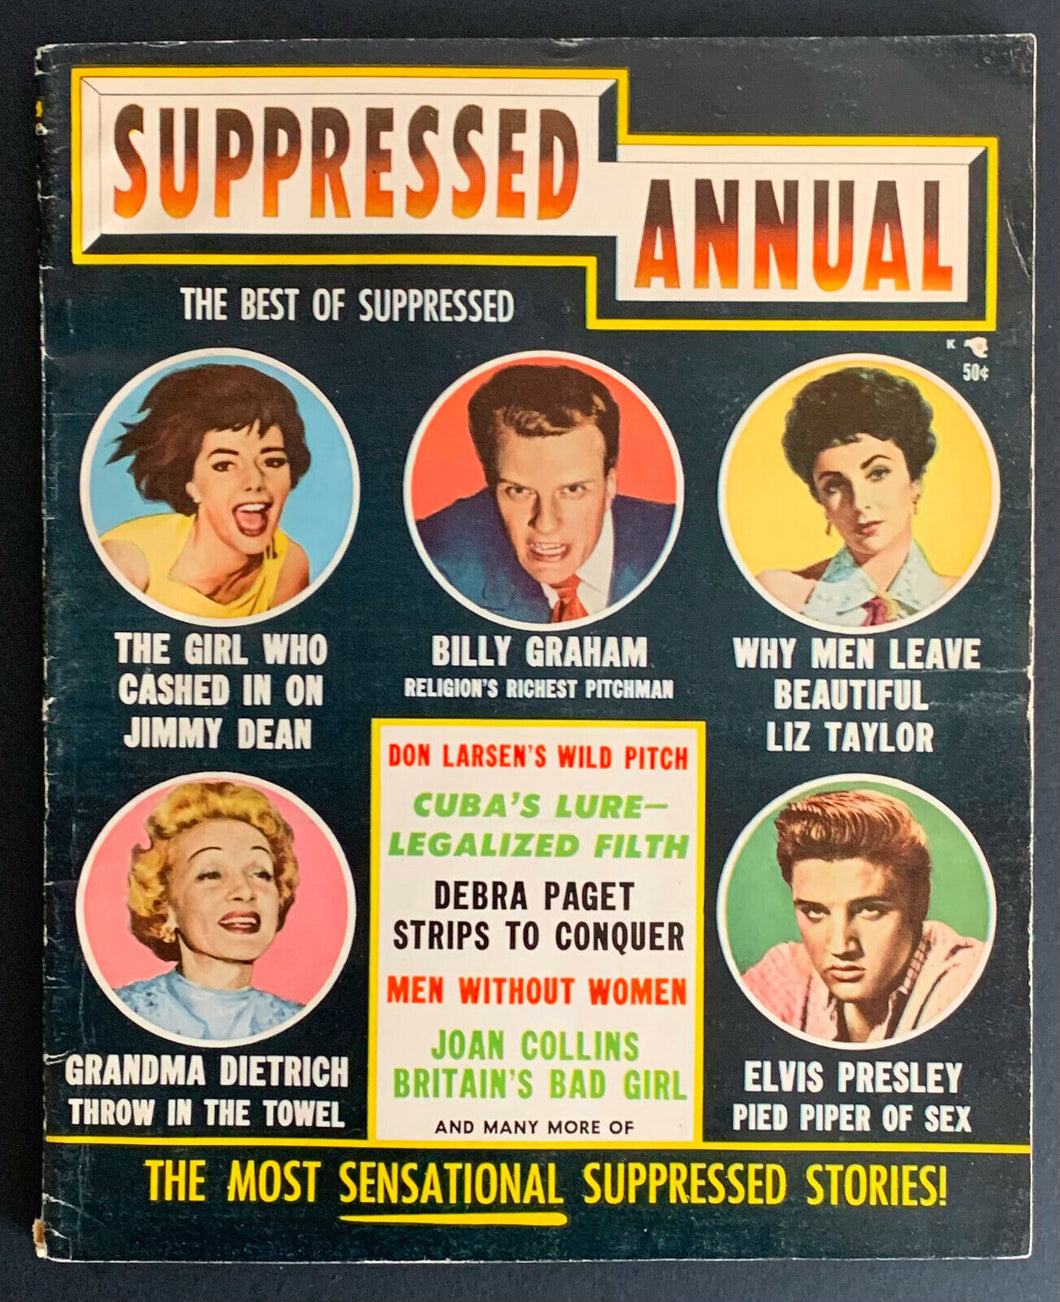 1957 Suppressed Annual Magazine Elvis Presley Pictured On Cover + Article Inside